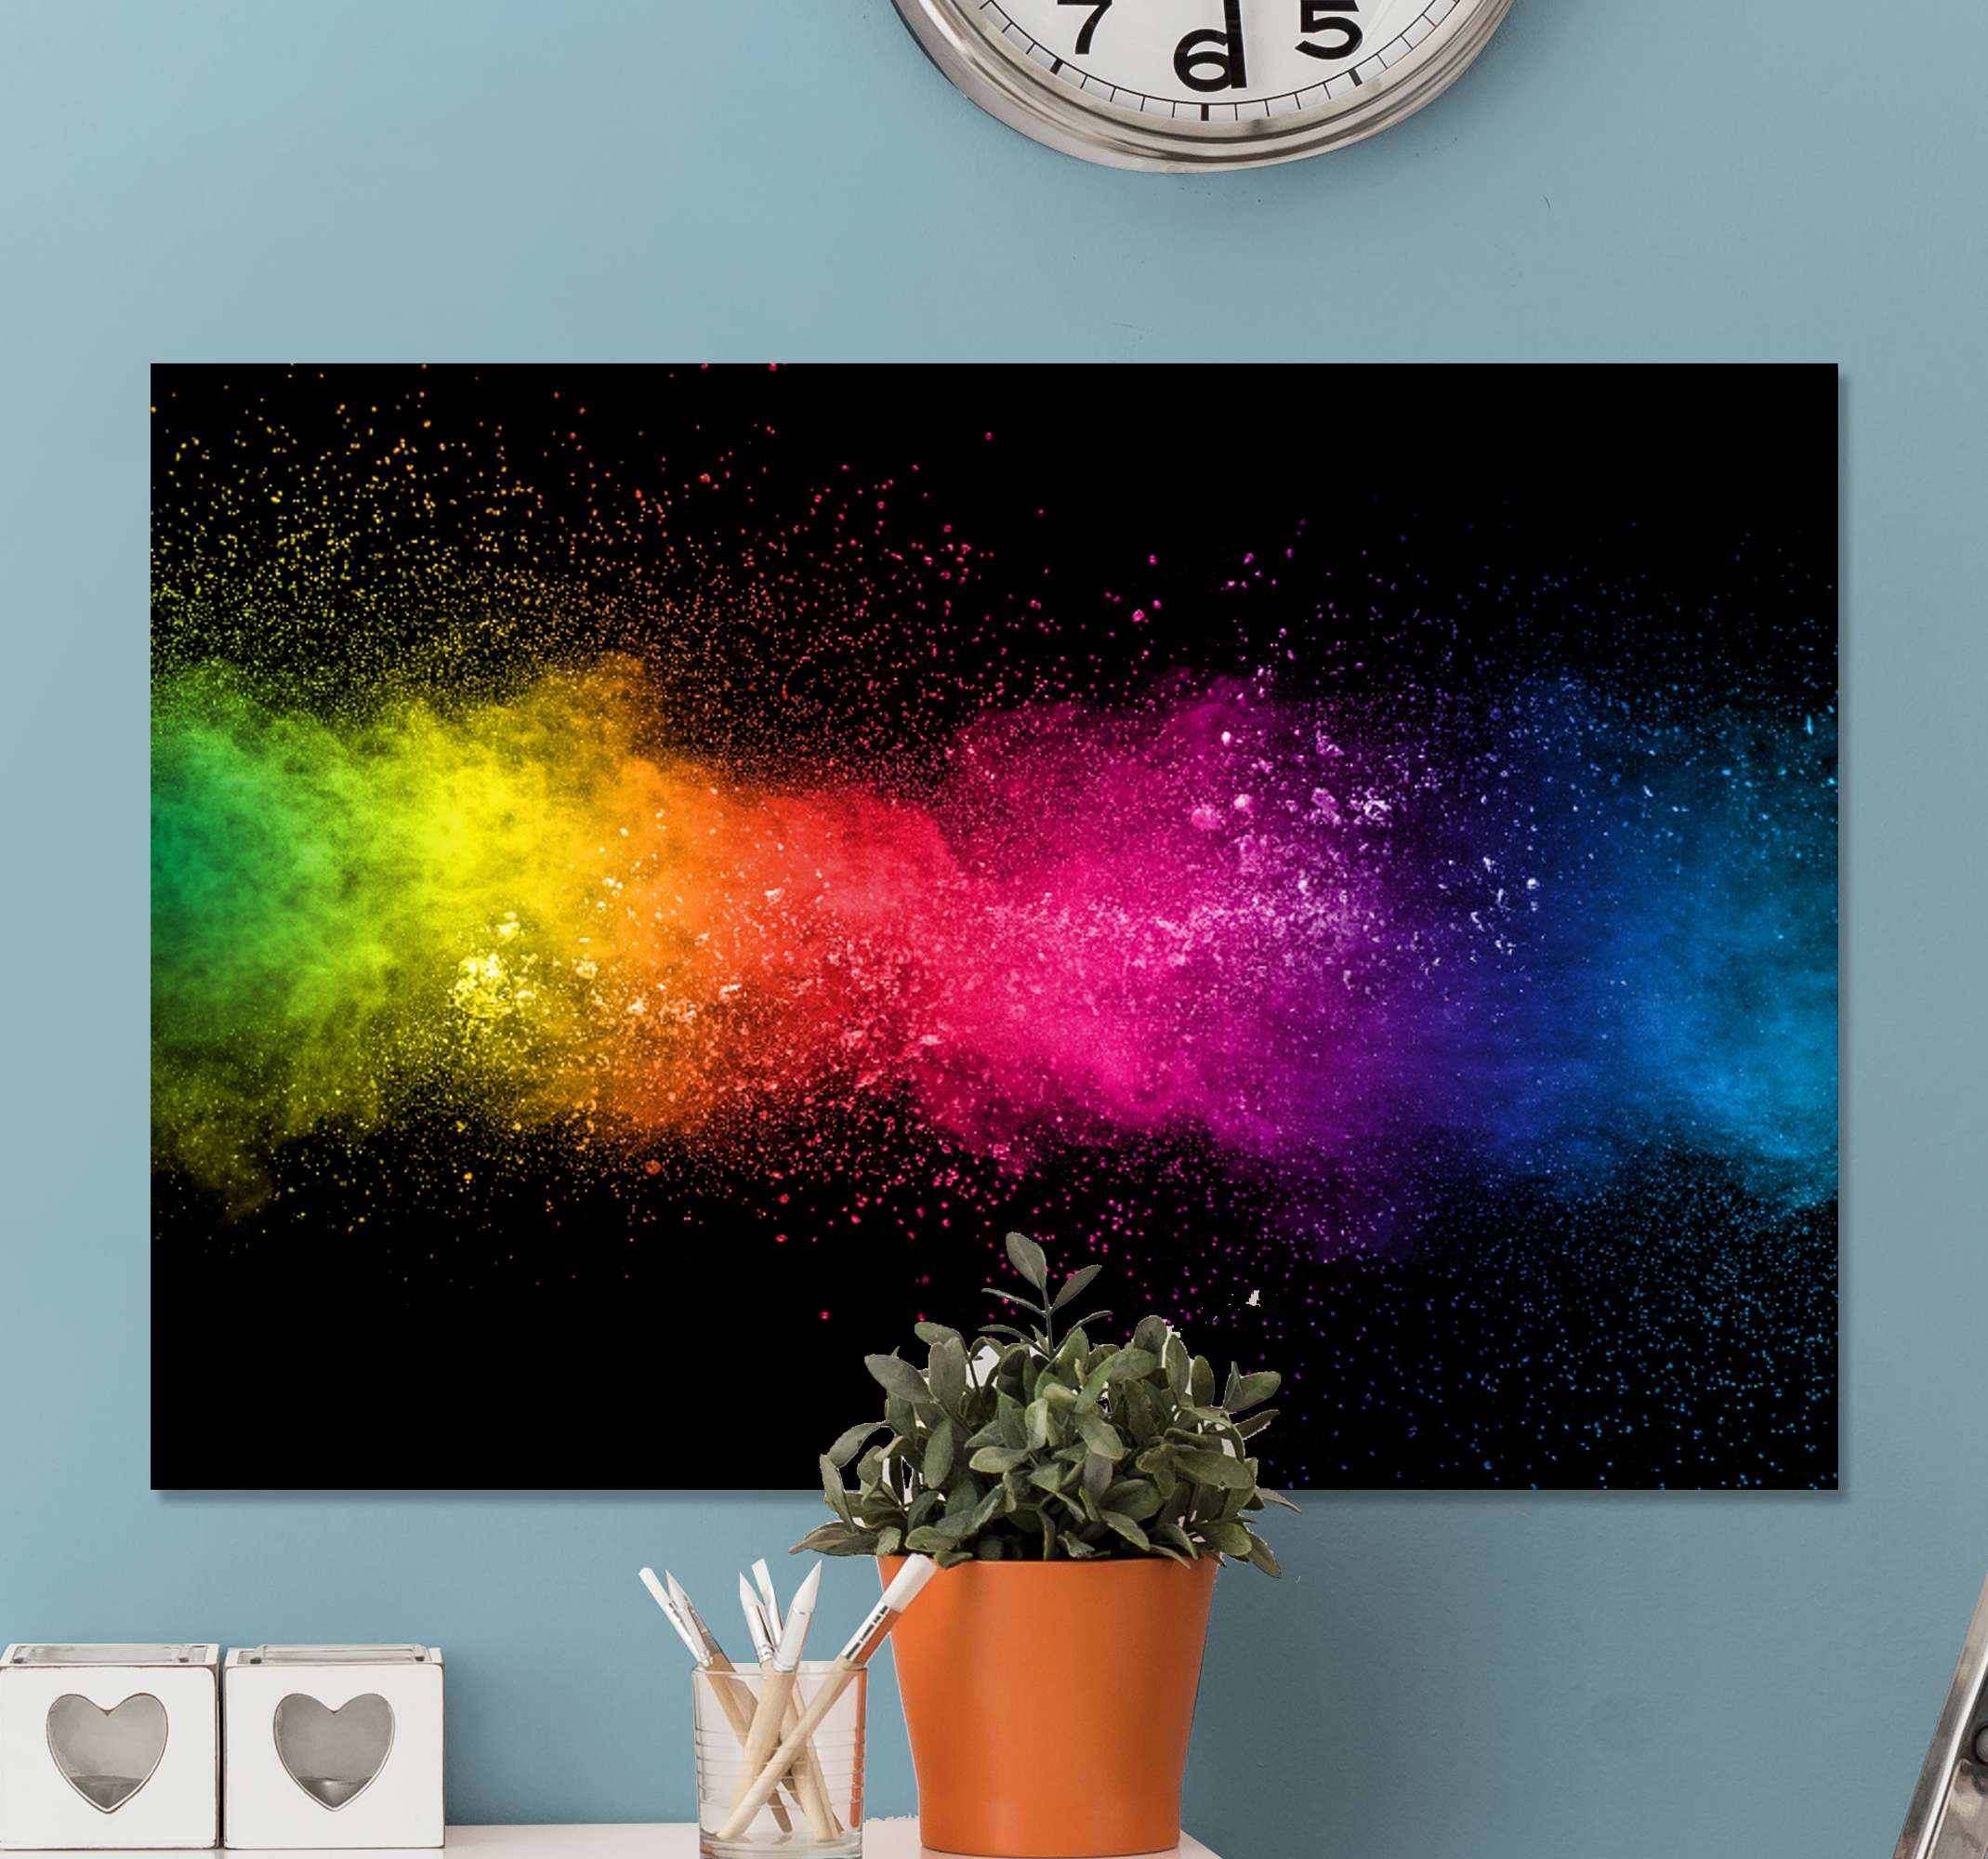 Colorful paint colors abstract mural - TenStickers